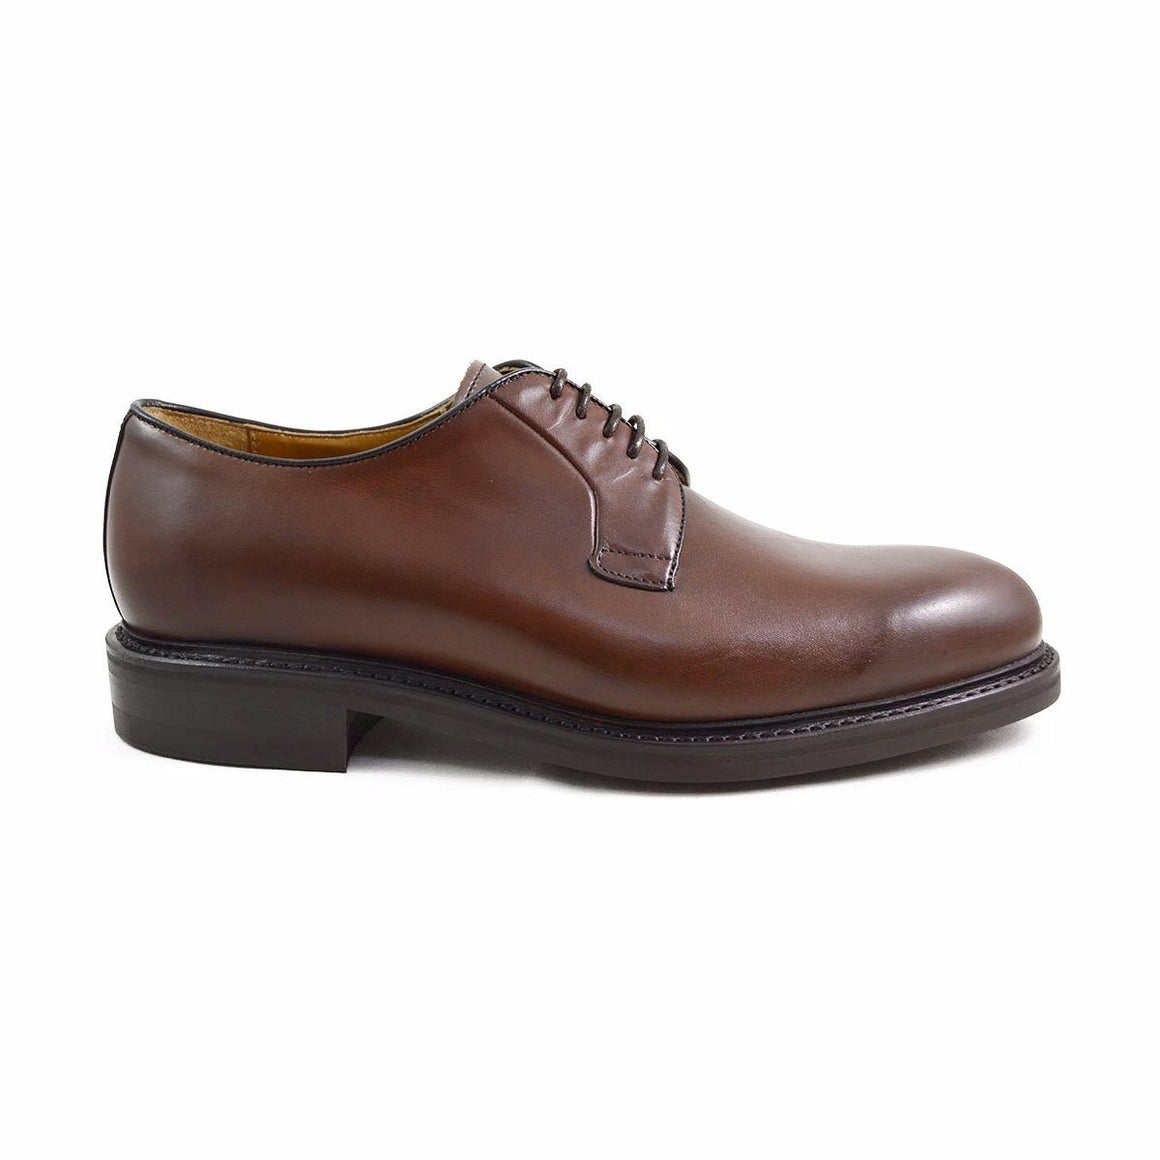 NEW - A Fine Pair of Shoes - English Handmade Shoes and Brogues Online